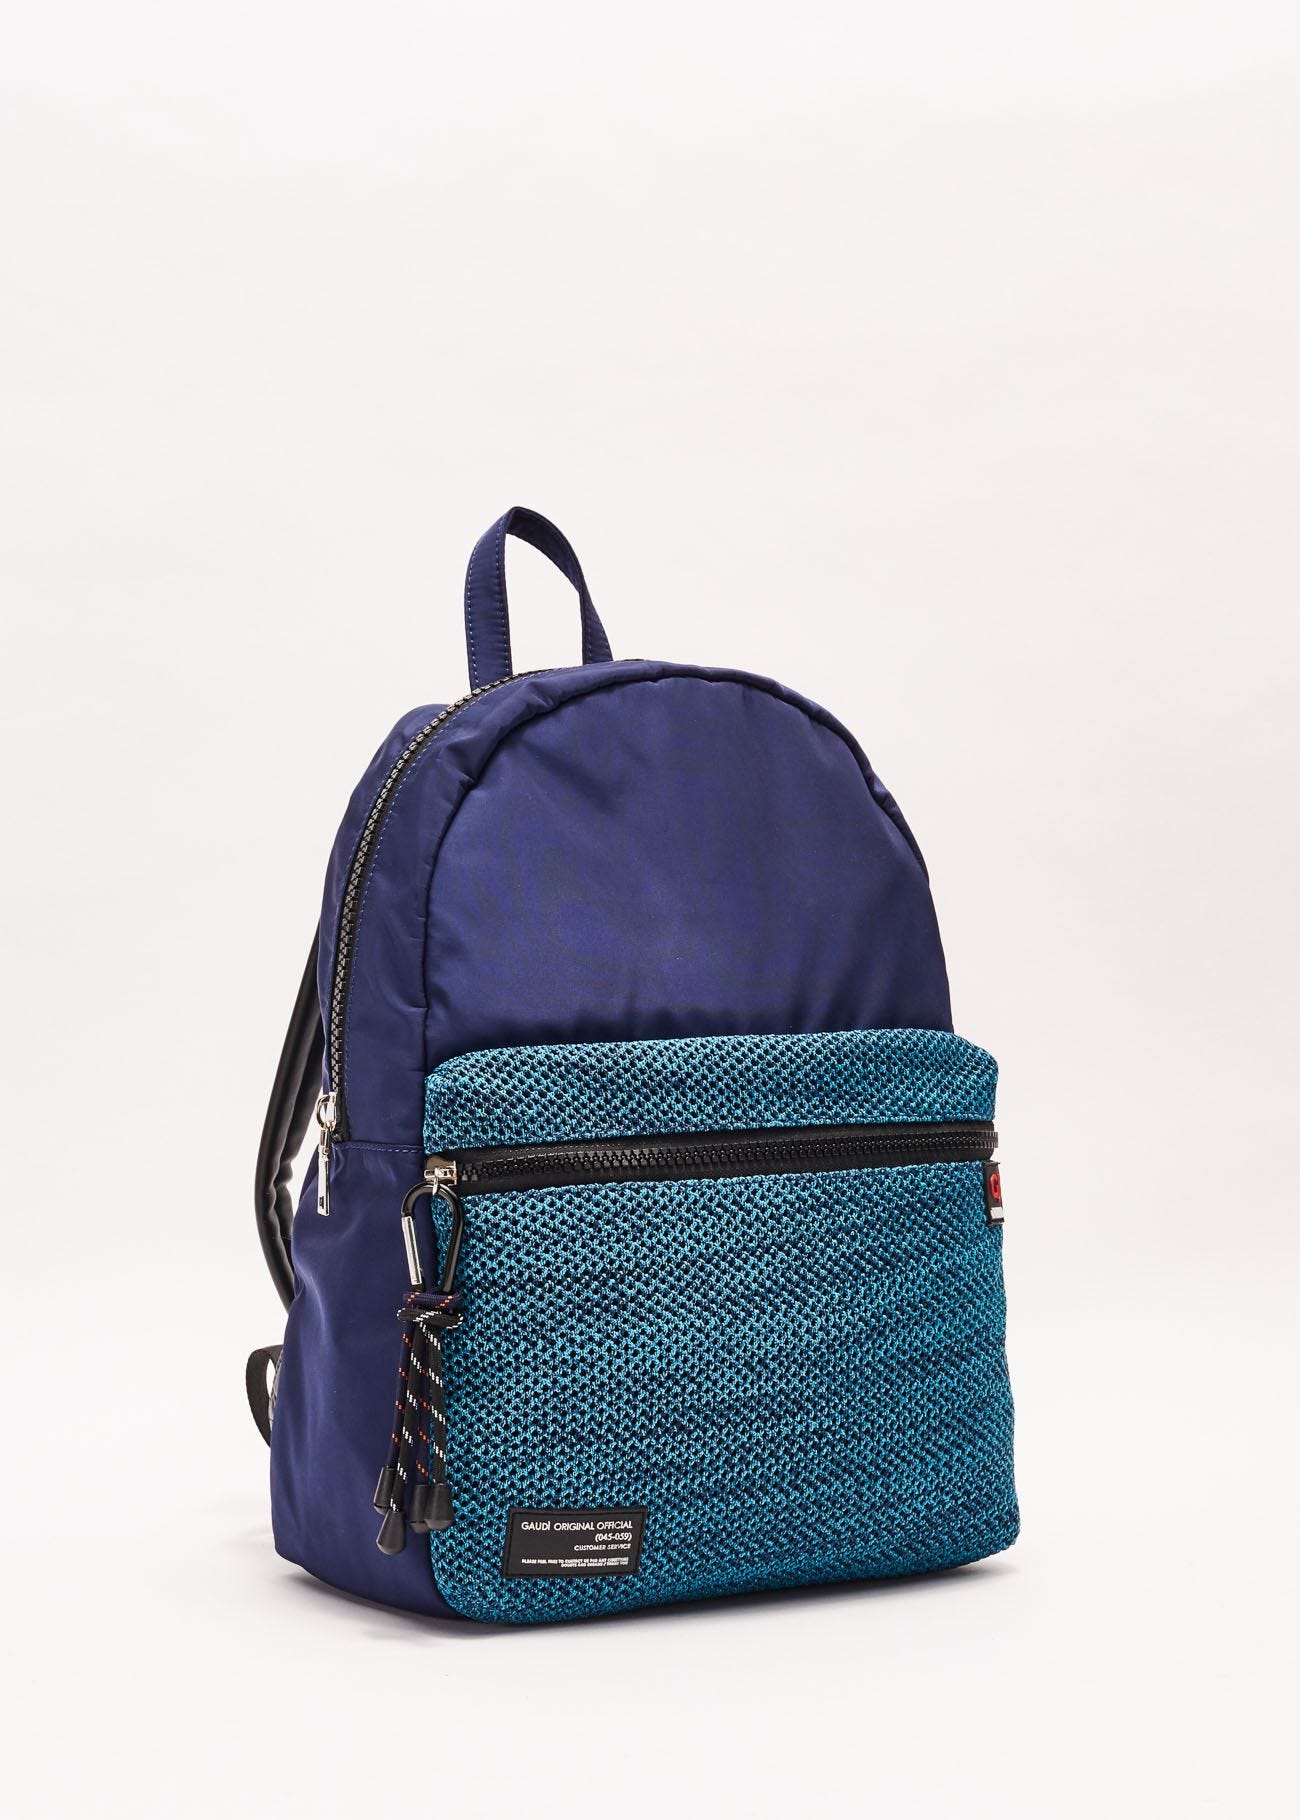 Backpack in nylon and mesh